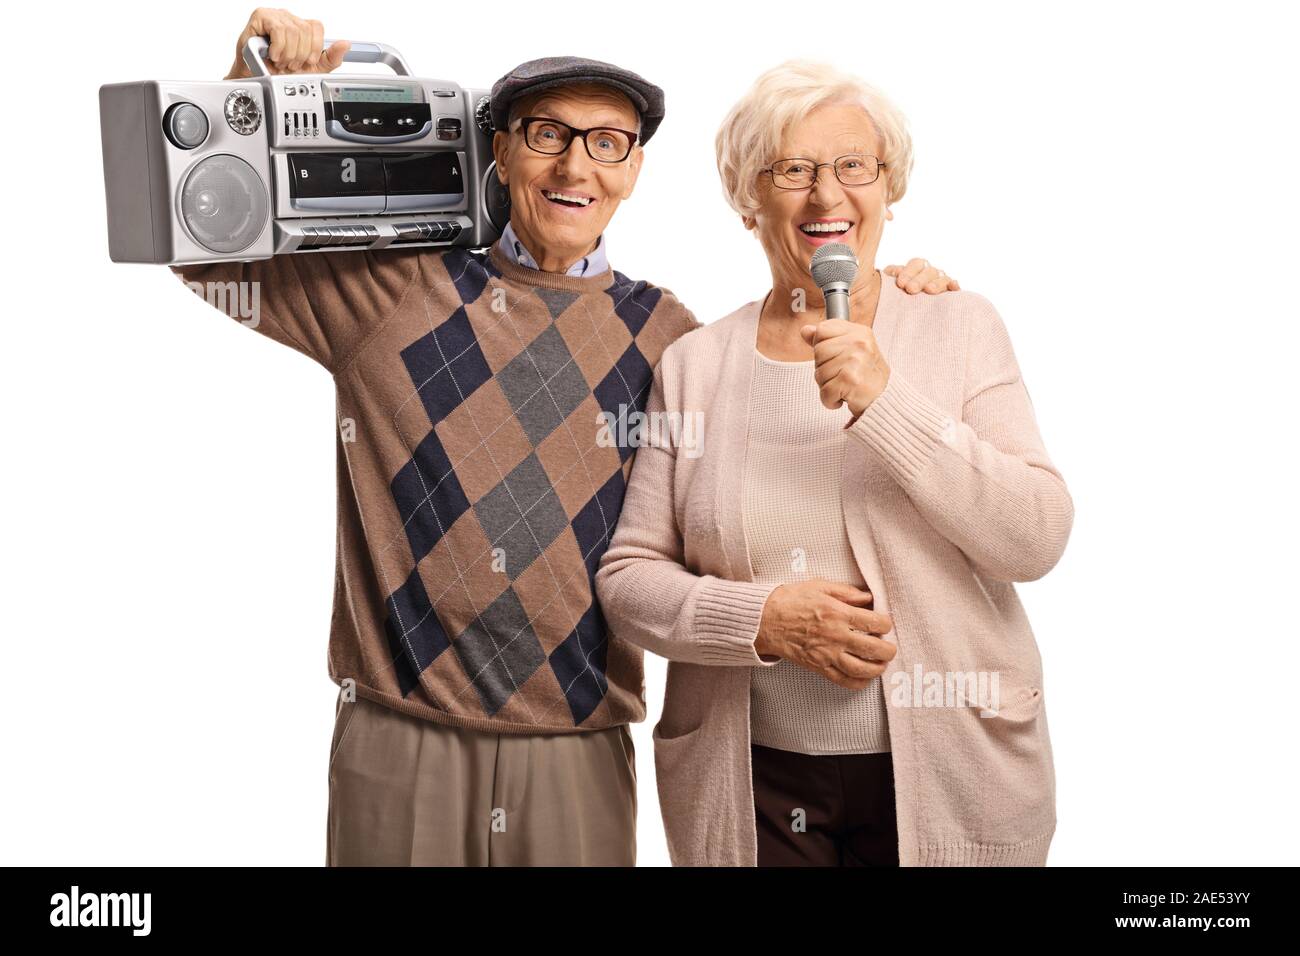 Elderly woman holding a microphone and an elderly man with a boombox radio isolated on white background Stock Photo